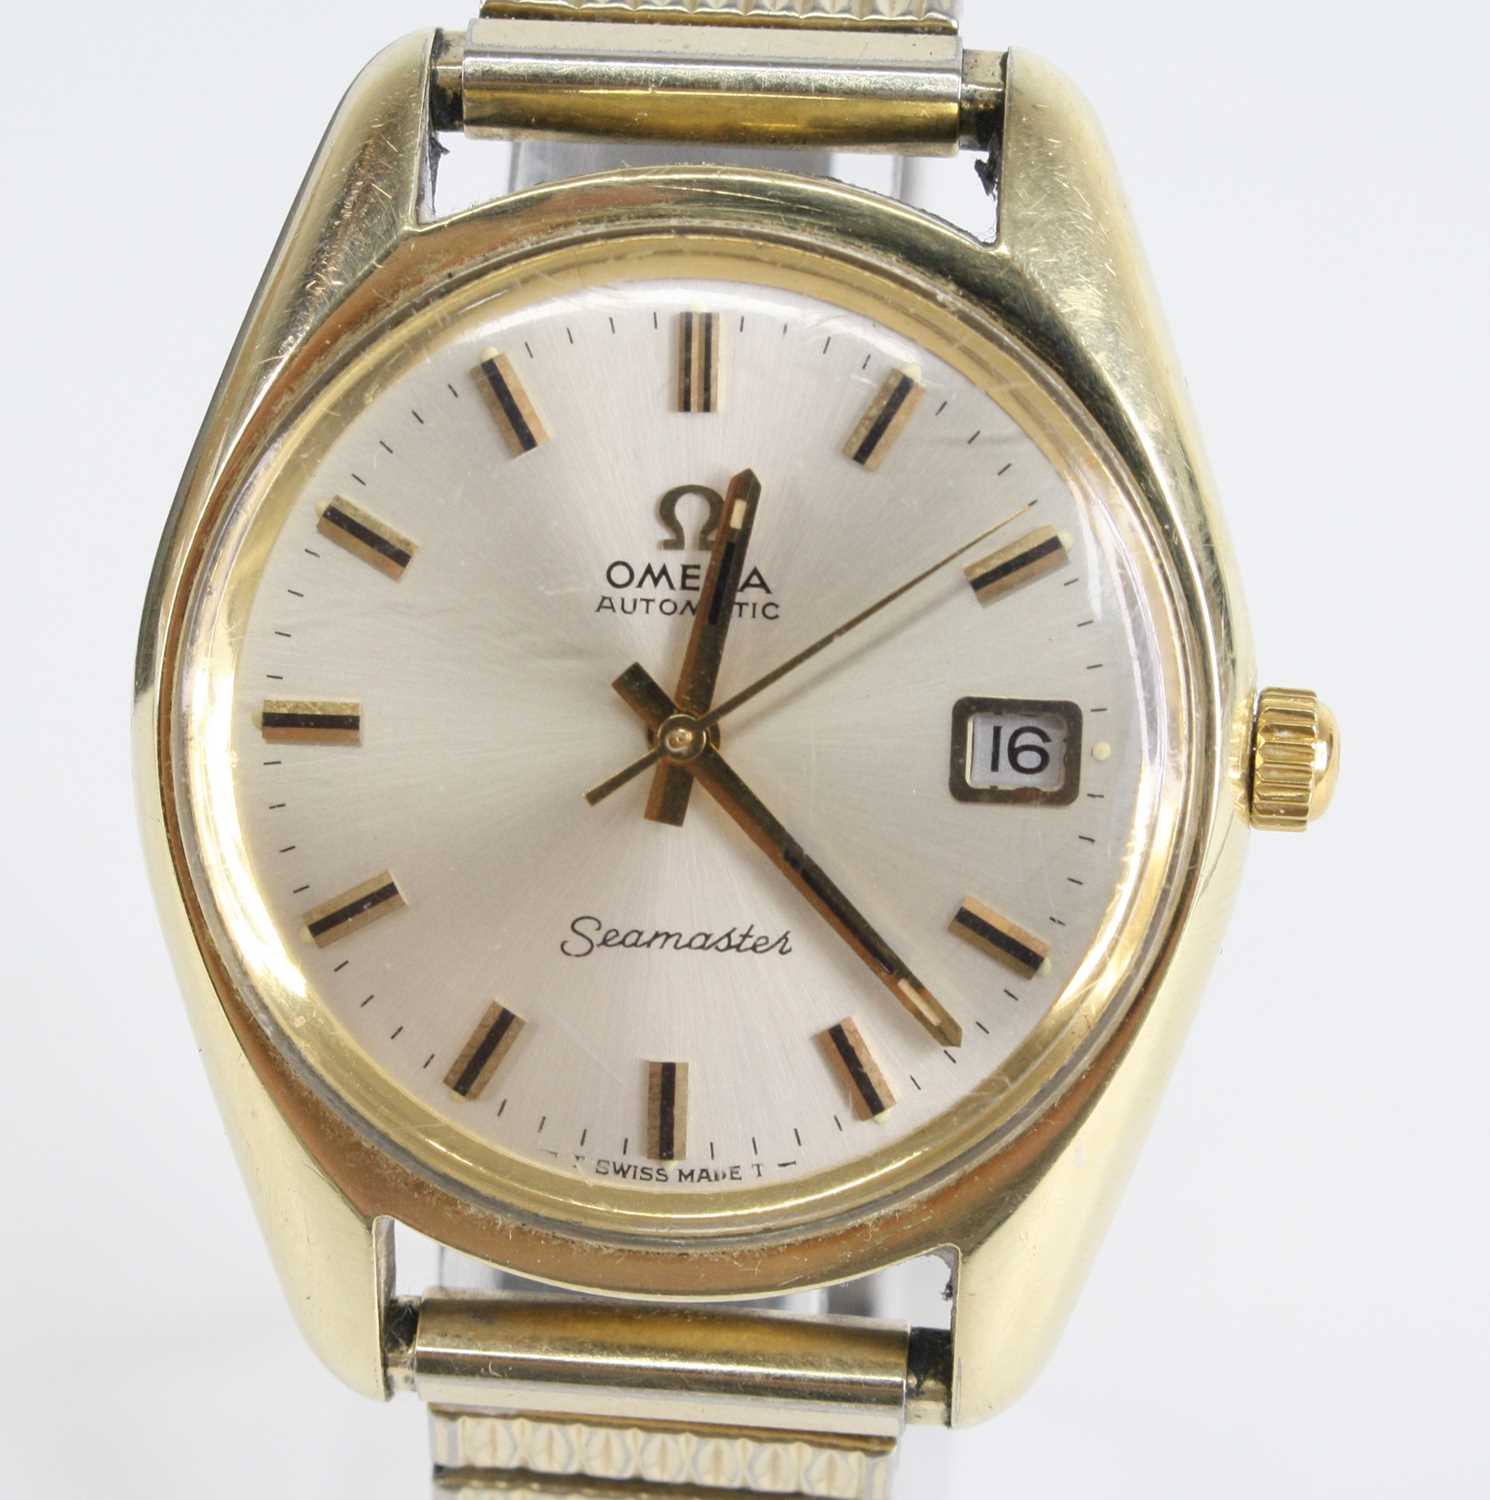 A gents Omega Seamaster gold-plated steel automatic watch, having a round silver baton dial with